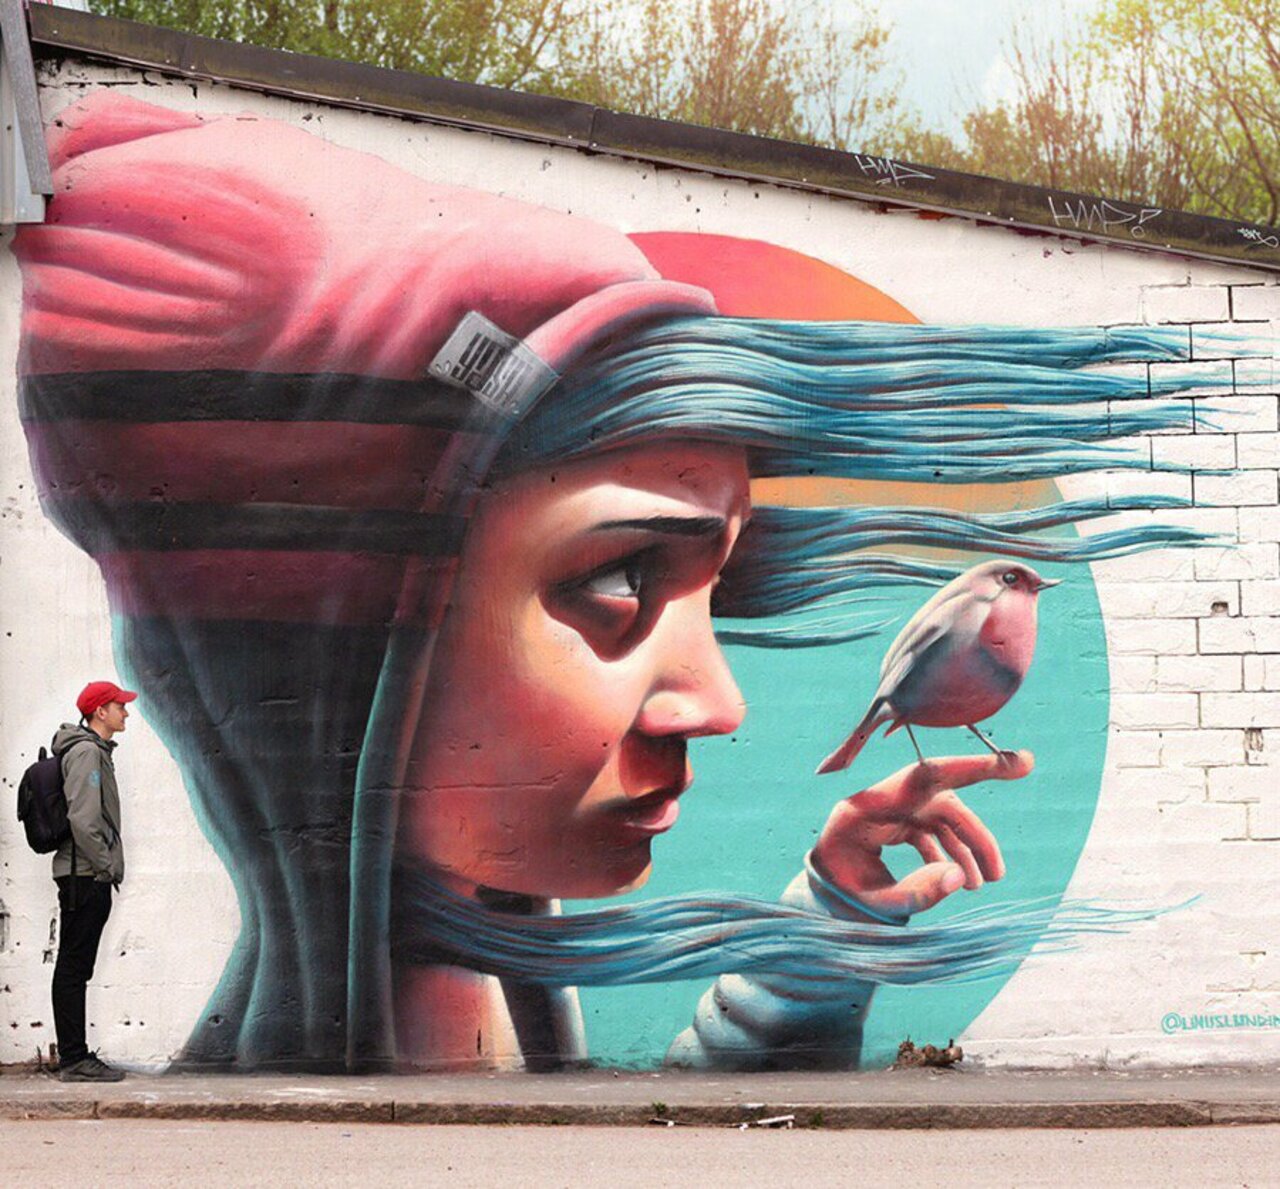 Artist of the Day: Yash, Stockholm, #Sweden people and animals with definite perspectives #mural #streetart https://t.co/obeHJRcBiC